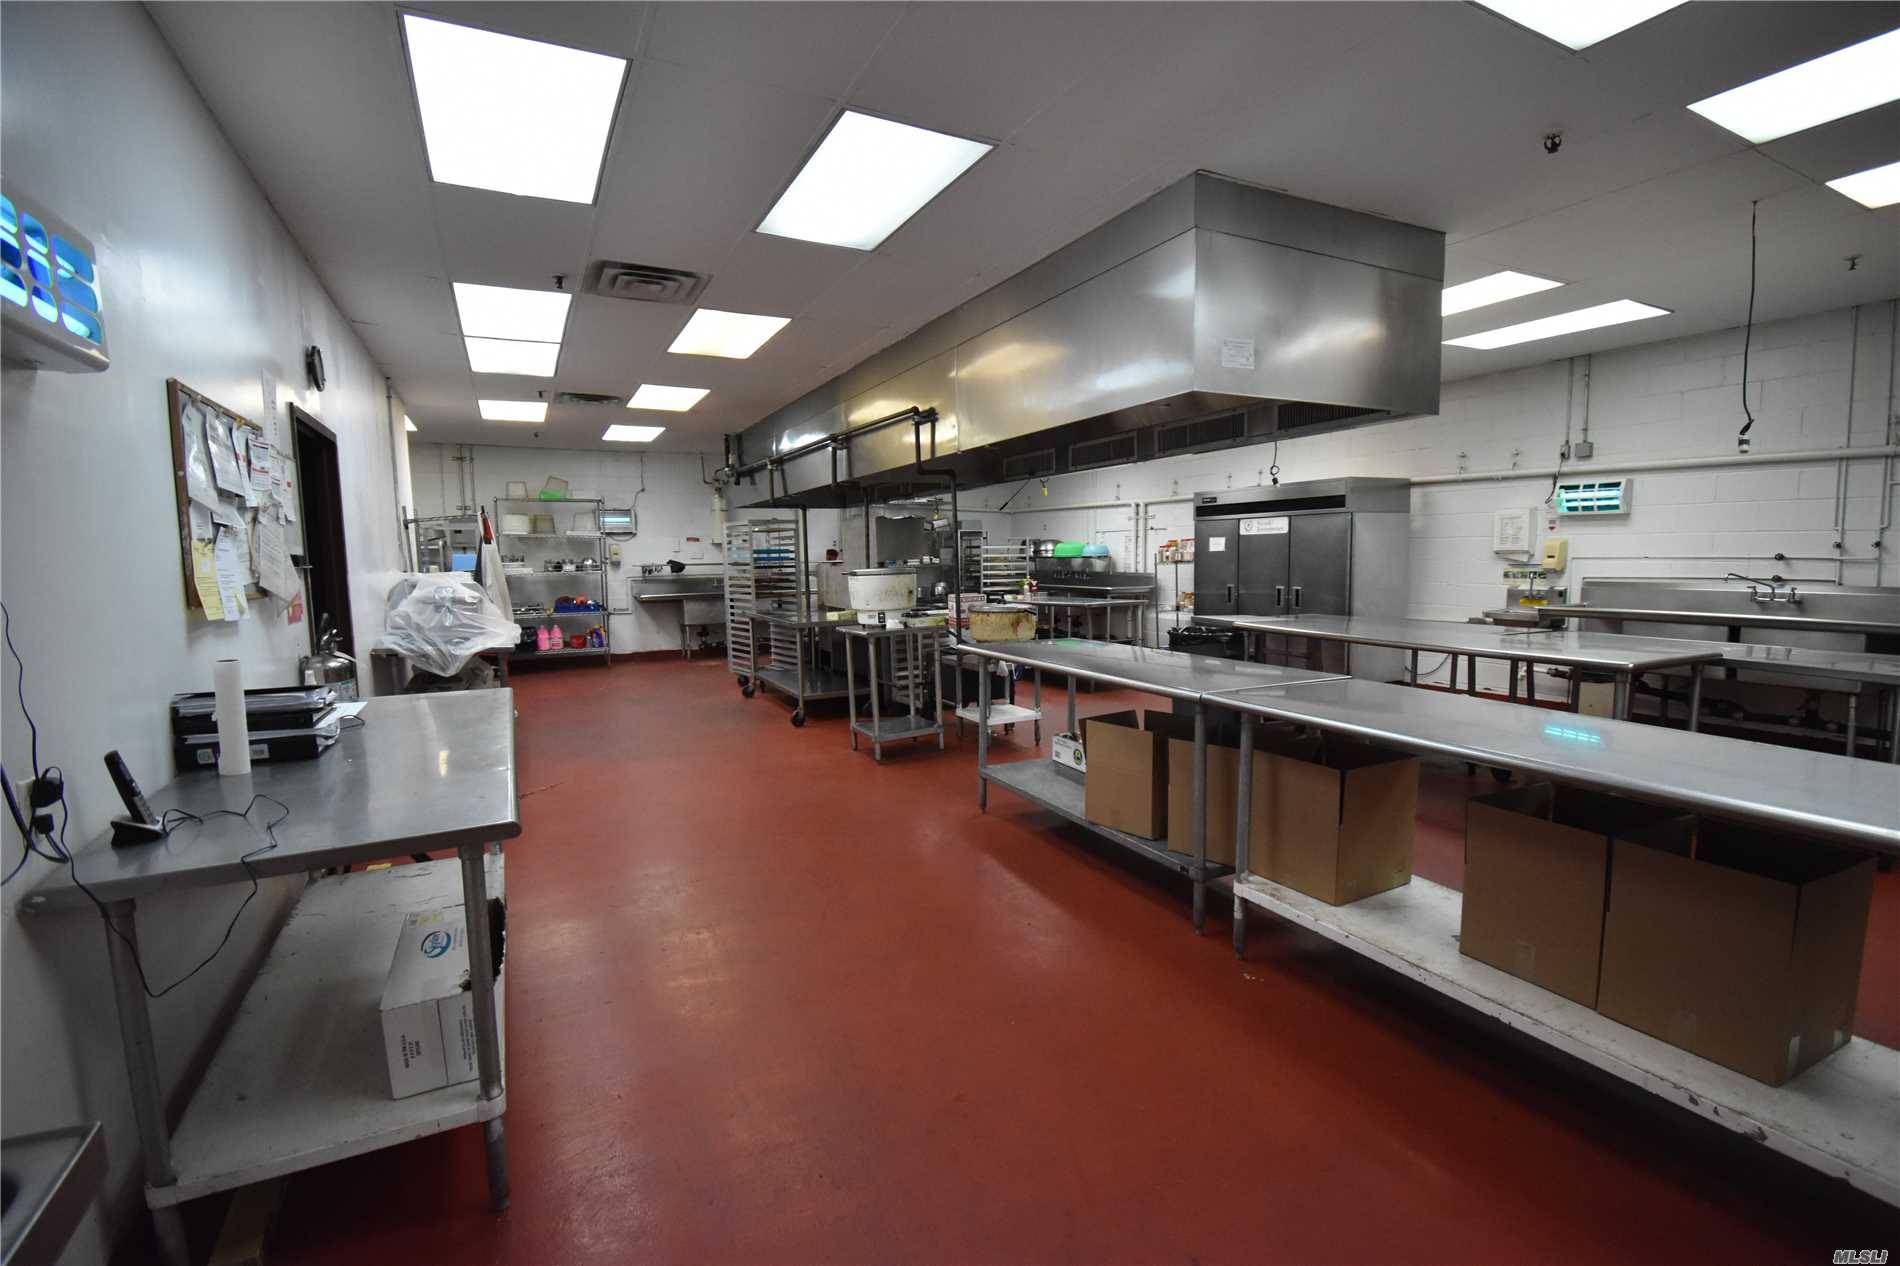 A Nice, Clean 3600 Sf Central Kitchen To Share For Rent.